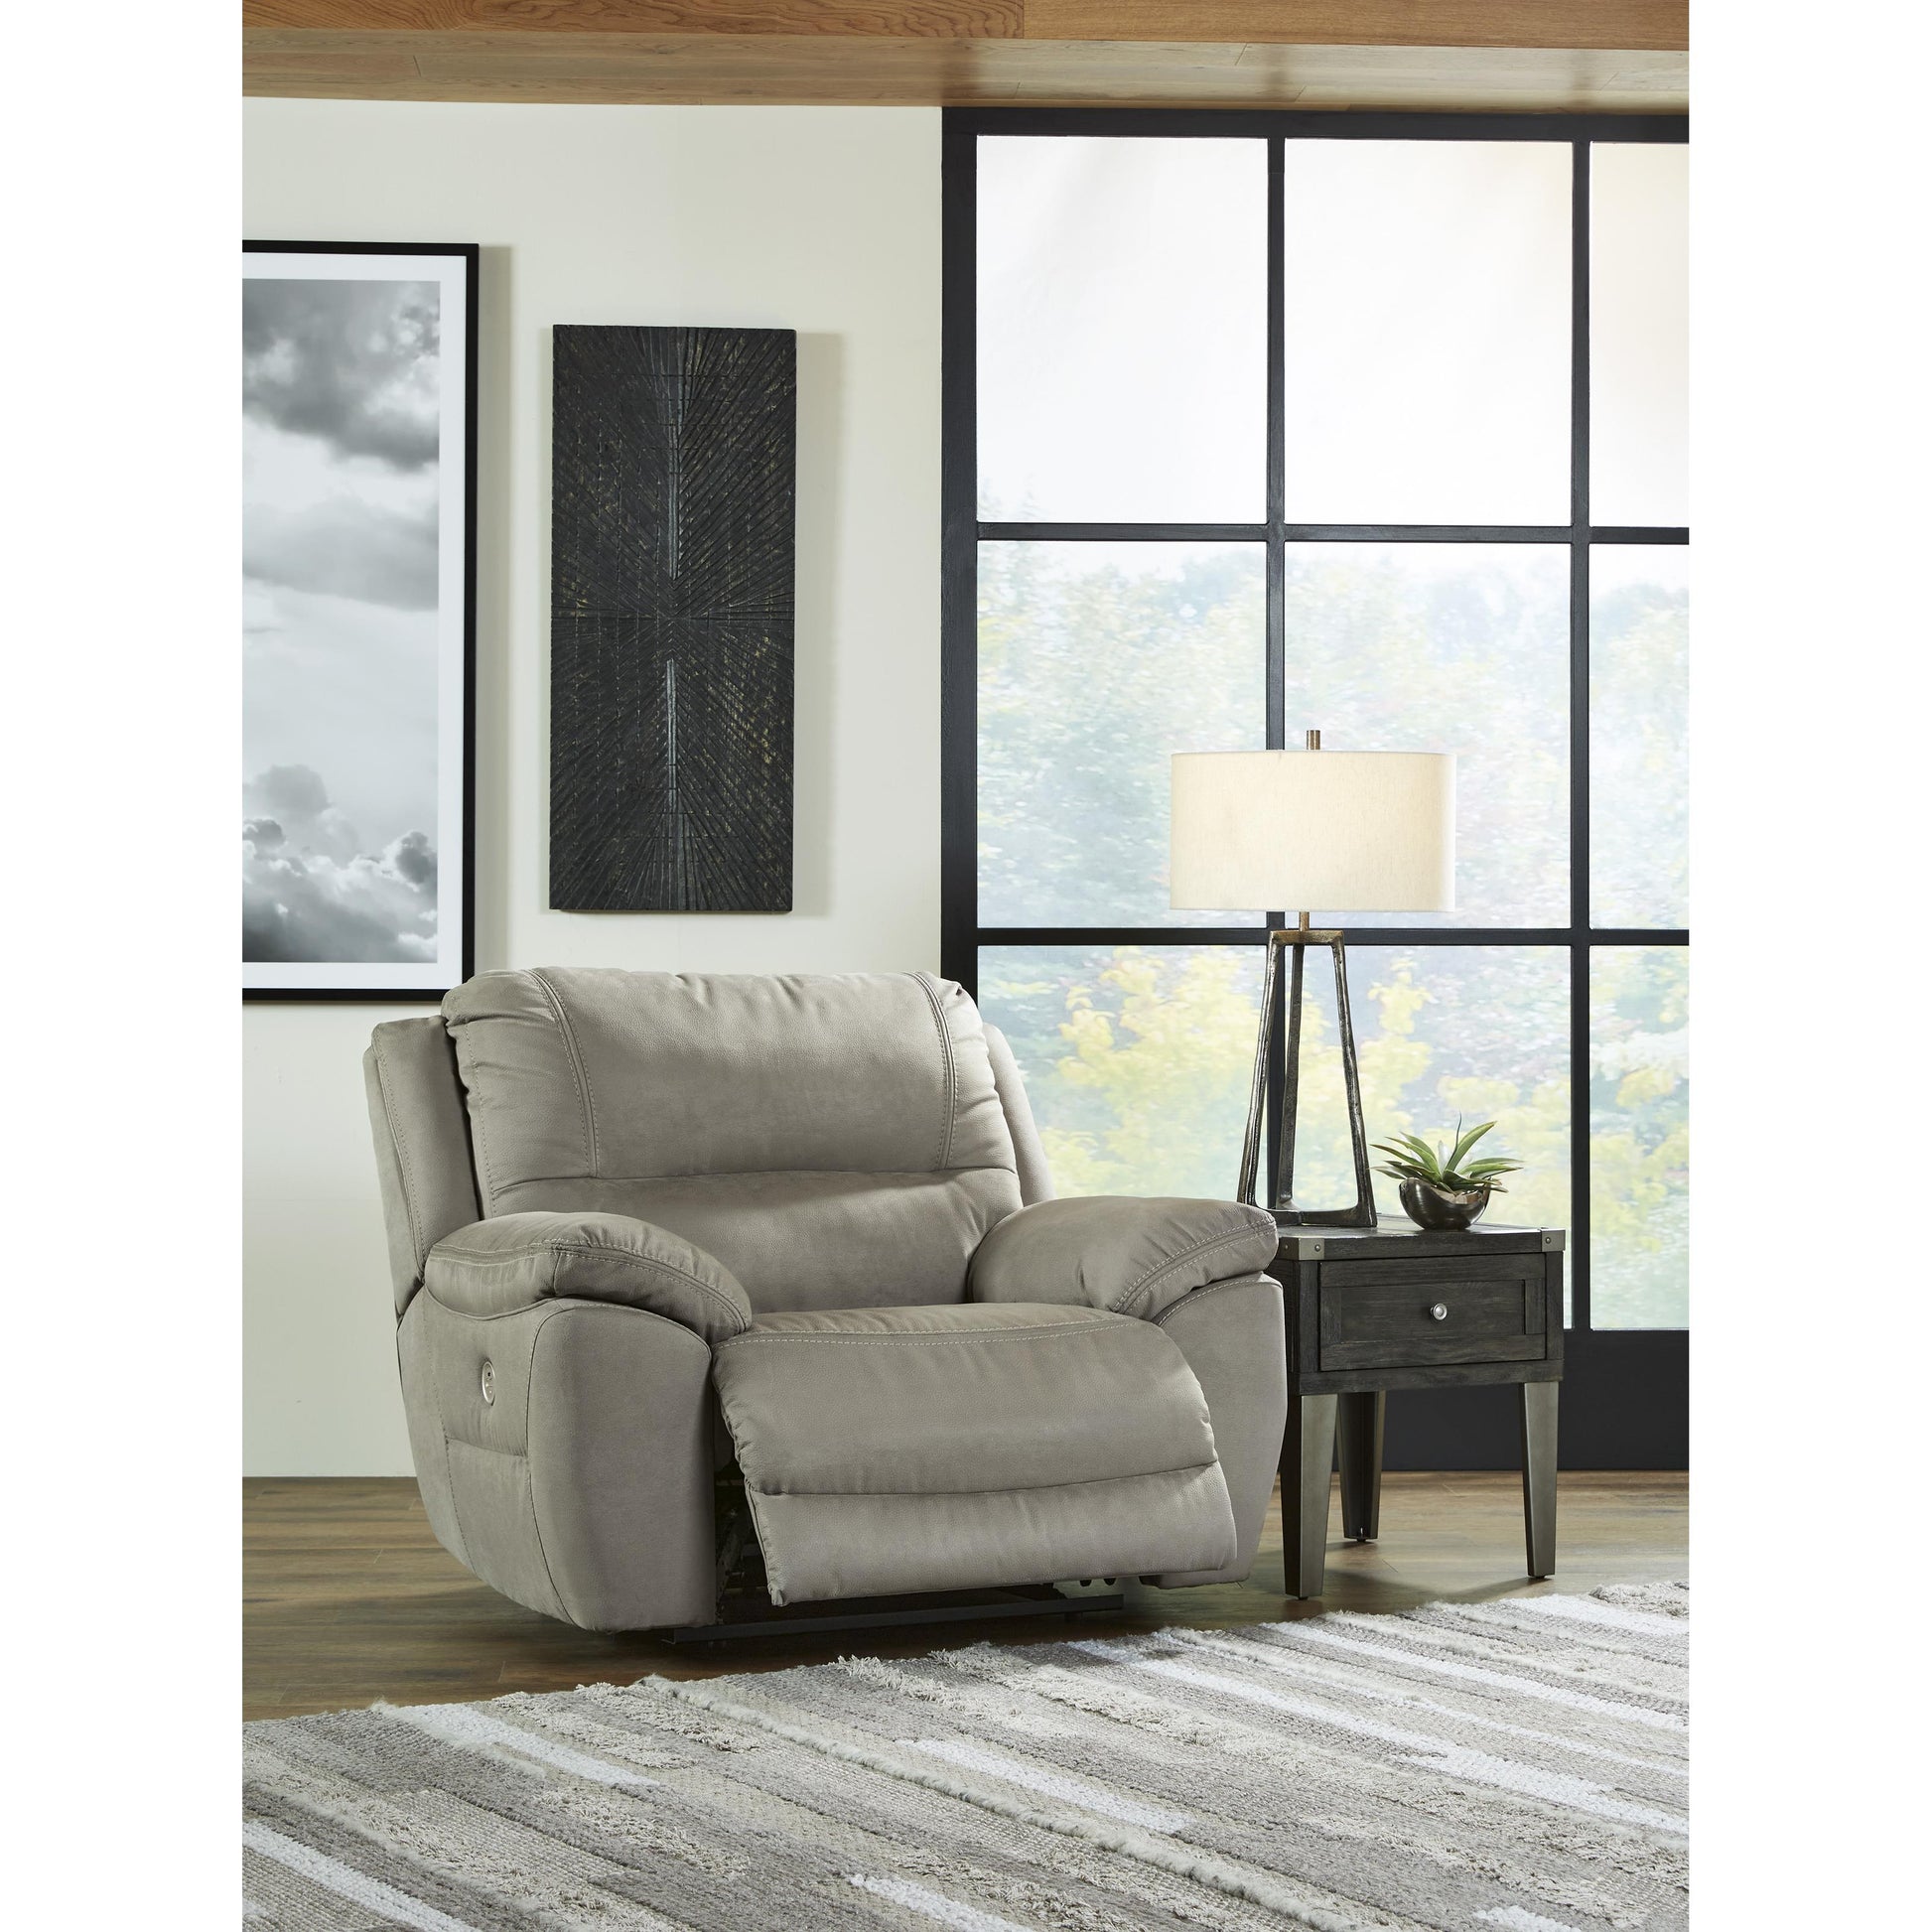 Signature Design by Ashley Next-Gen Gaucho Power Leather Look Recliner with Wall Recline 5420382 IMAGE 7